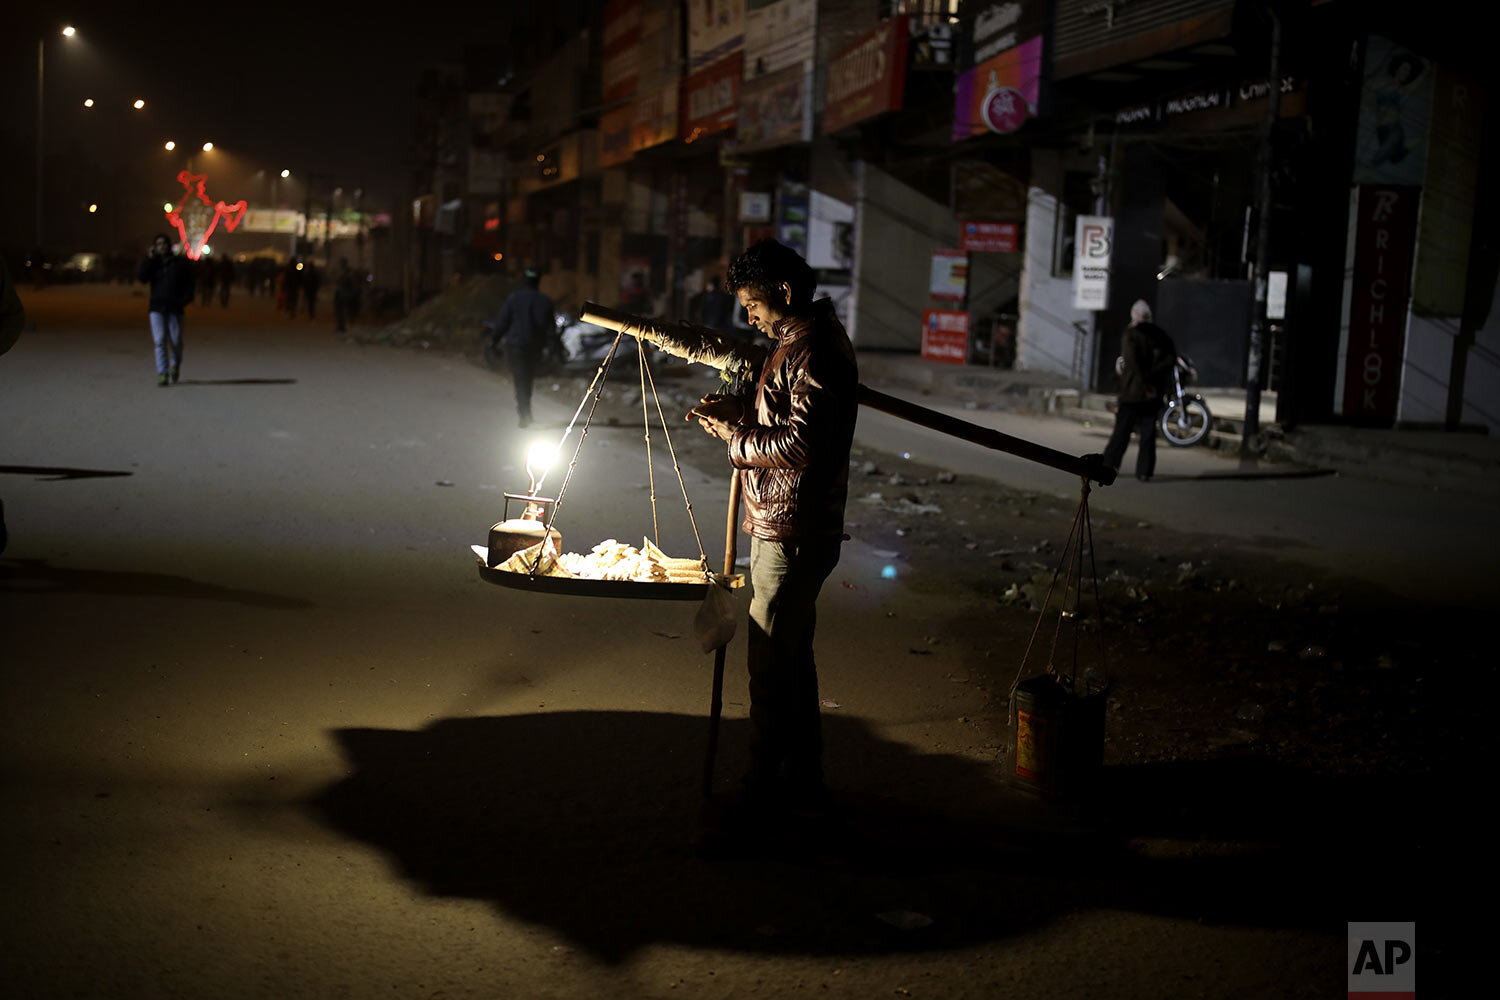  A roadside snack vendor waits for customers near a protest site against a new citizenship law that opponents say threatens India's secular identity, at Shaheen Bagh neighborhood of New Delhi, India, Saturday, Jan. 18, 2020. (AP Photo/Altaf Qadri) 